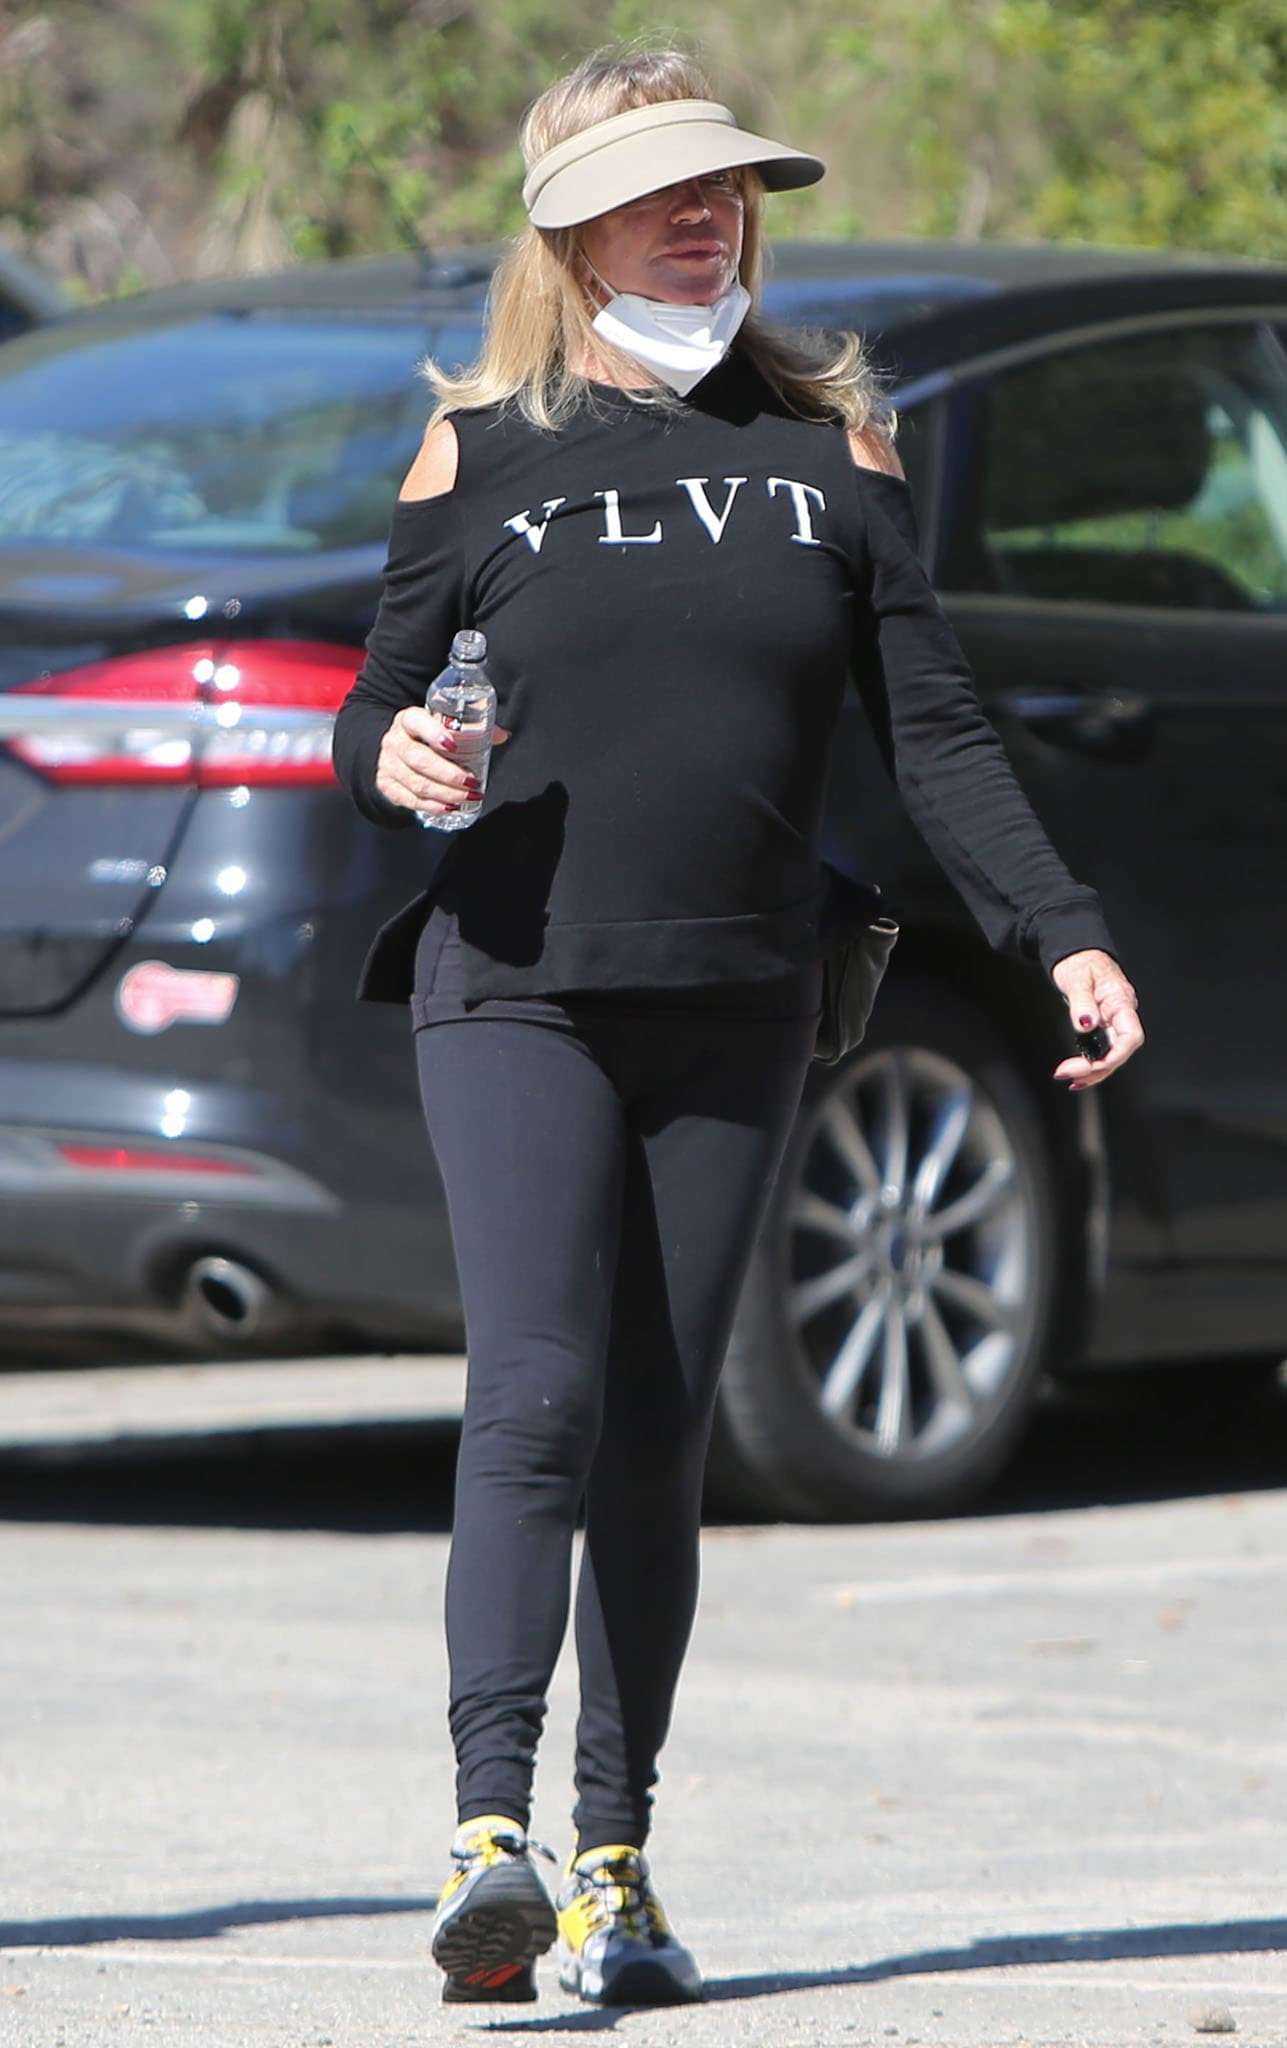 Goldie Hawn goes hiking in leggings and a "VLVT" black cold-shoulder top